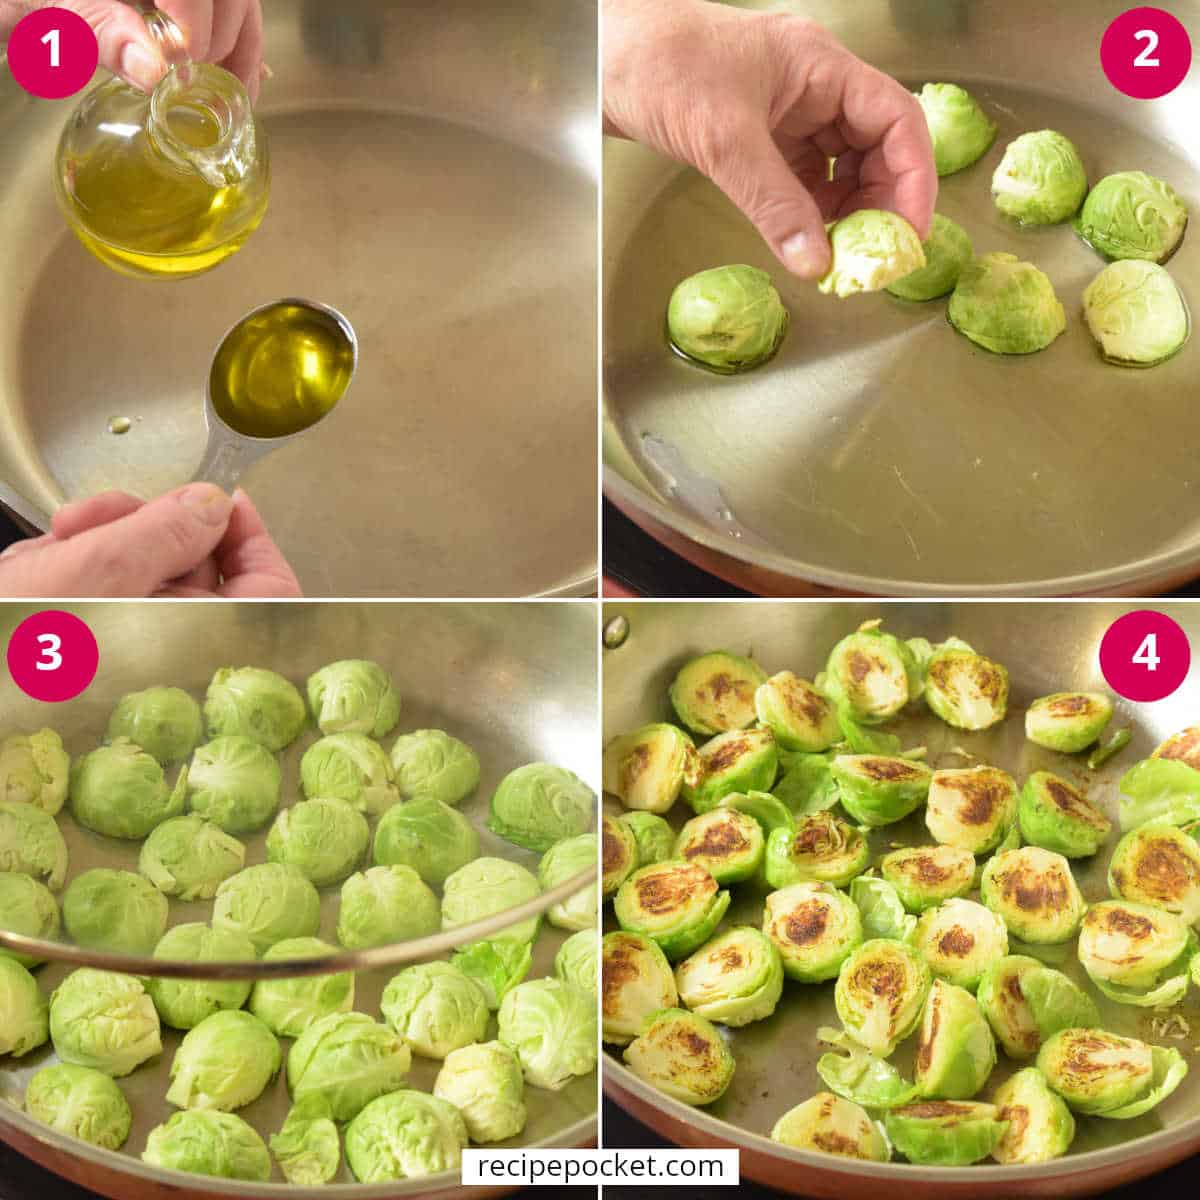 Four part step by step image showing the first steps of cooking Brussel sprouts.